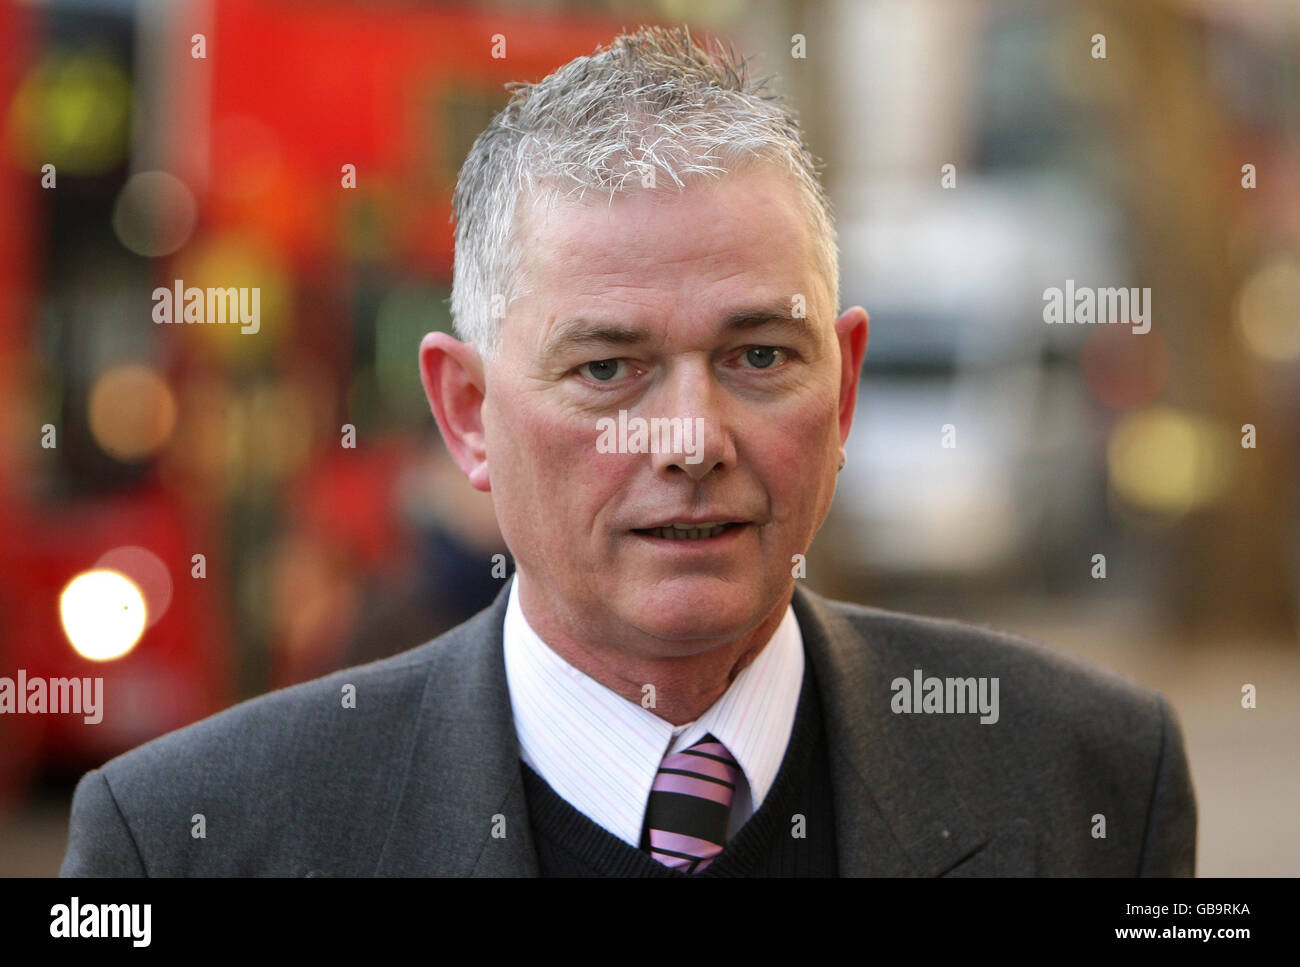 Landlord Hamish Howitt arrives at the High Court in London, where he is locked in a legal battle over moves by a local council to shut down his business after he defied the smoking ban. Stock Photo